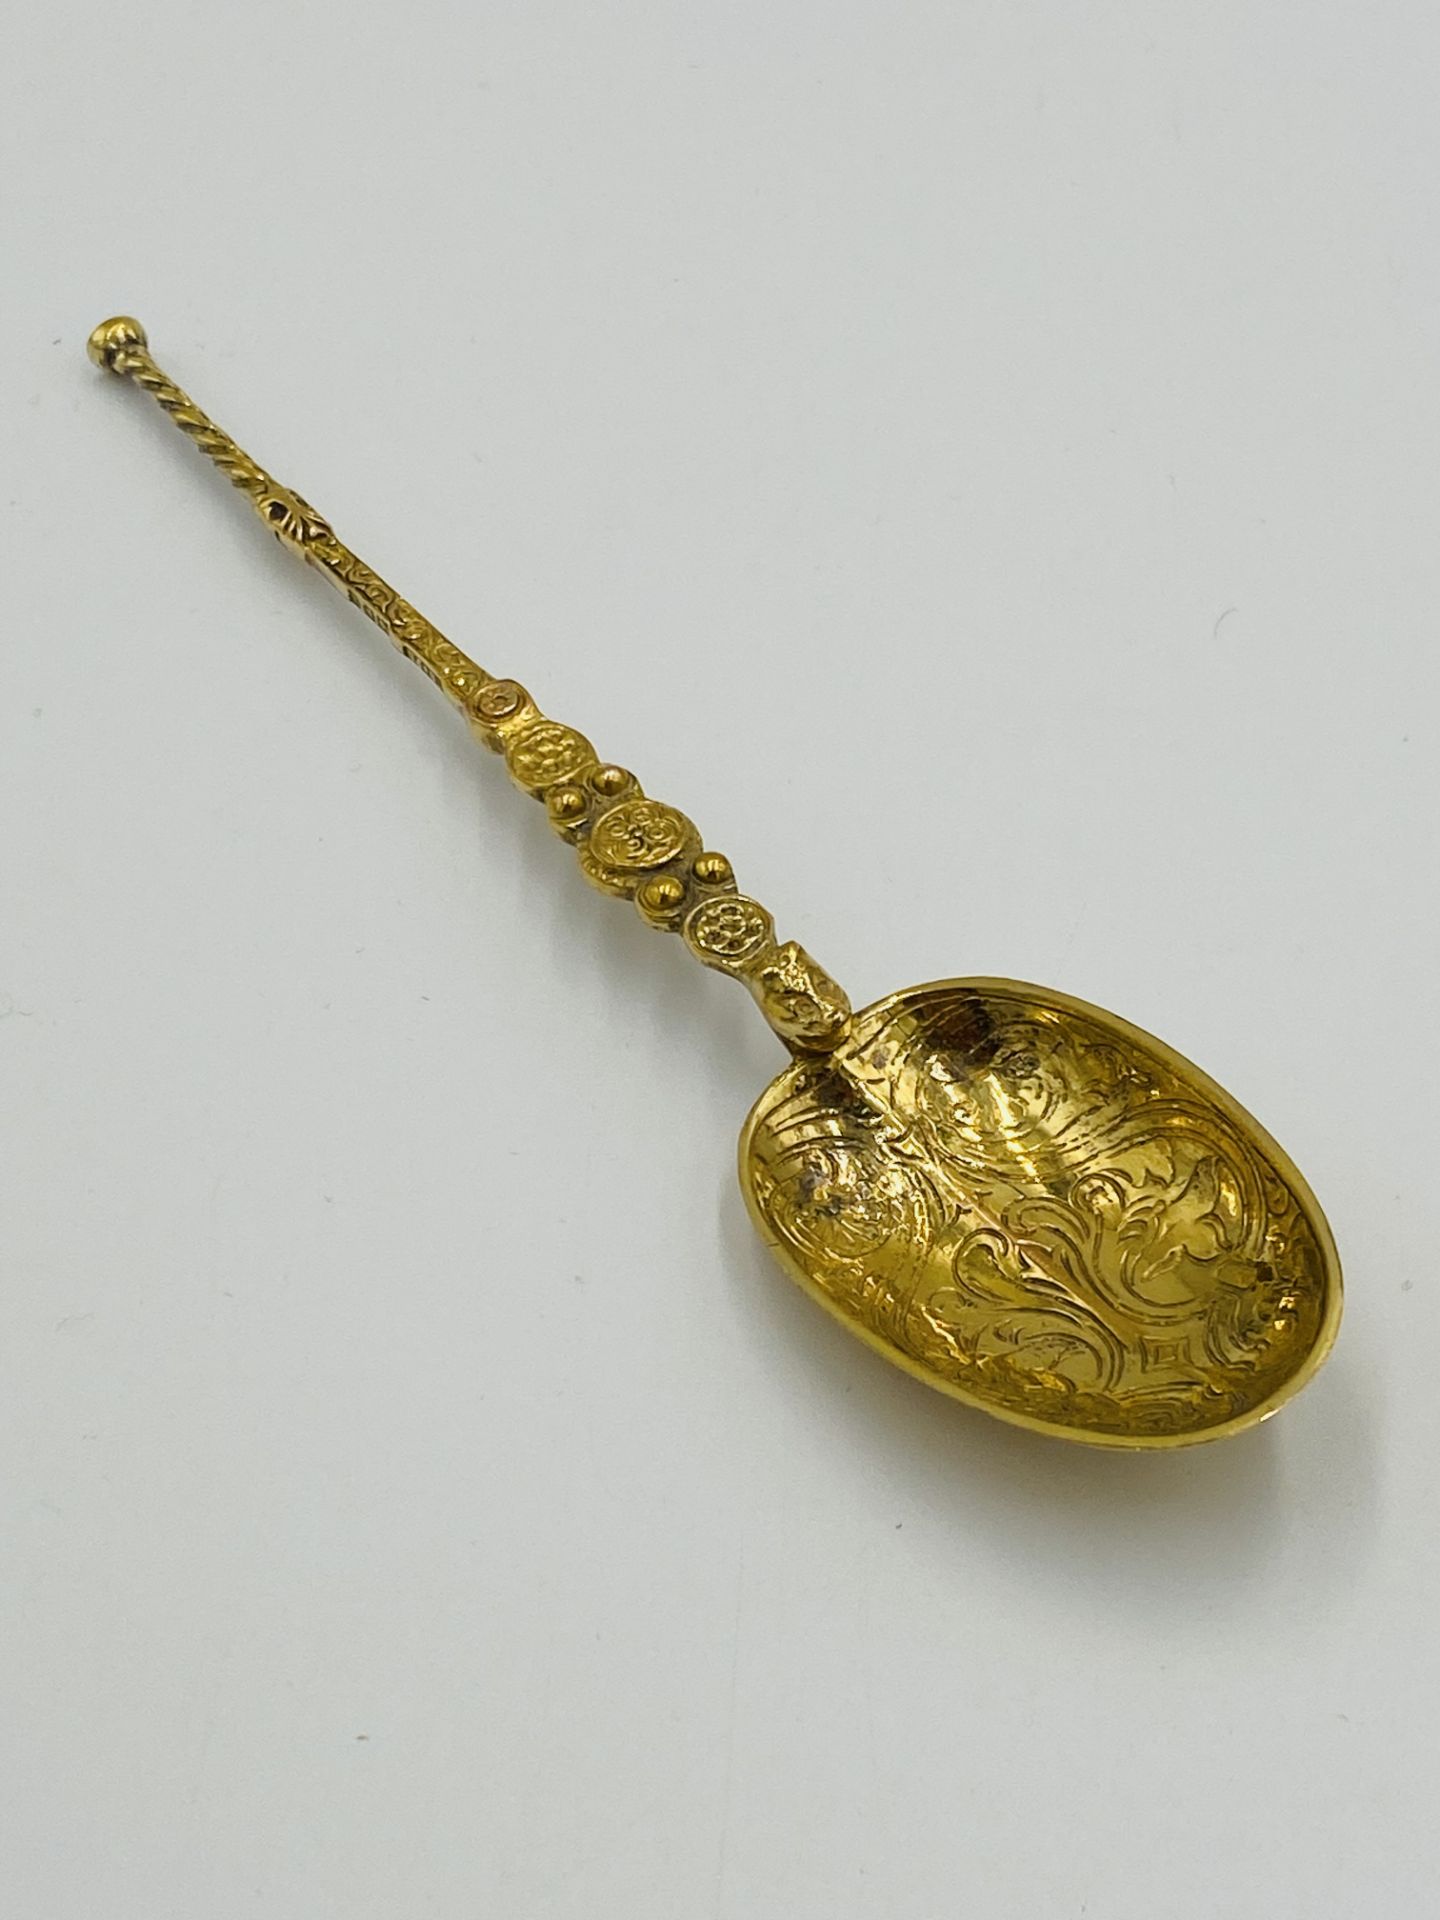 Silver gilt anointing set in box - Image 3 of 7